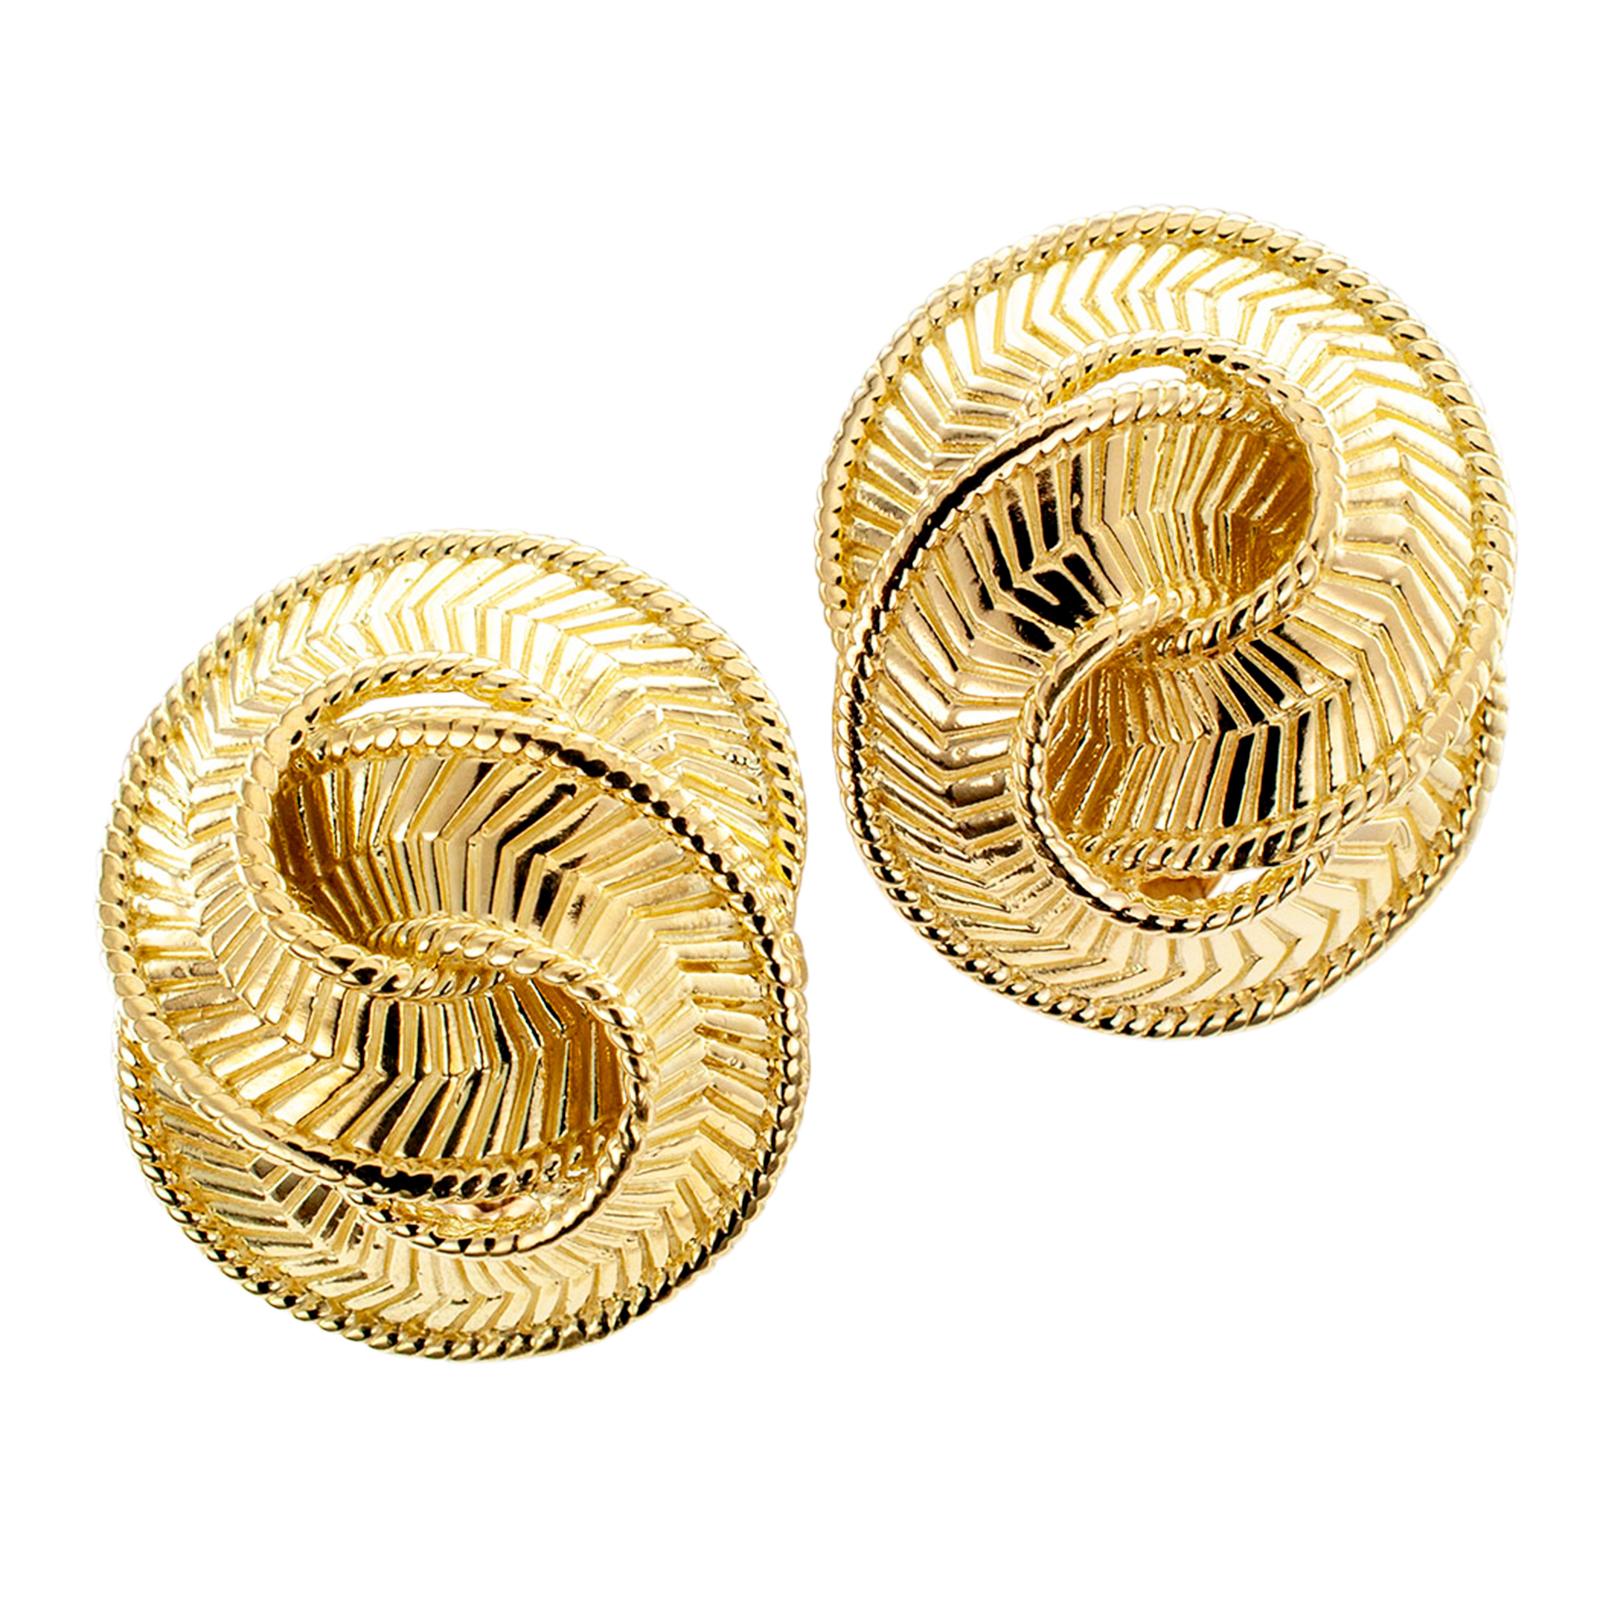 DETAILS:
Estate herring bone pattern double knot clip-on earrings circa 1970.

METAL: 18-karat yellow gold.

EARRING BACKS: clip backs:

MEASUREMENTS: approximately 1 1/8” (1.4 cm) long and 15/16” (24 mm) wide overall, 30.2 grams.

CONDITION: high